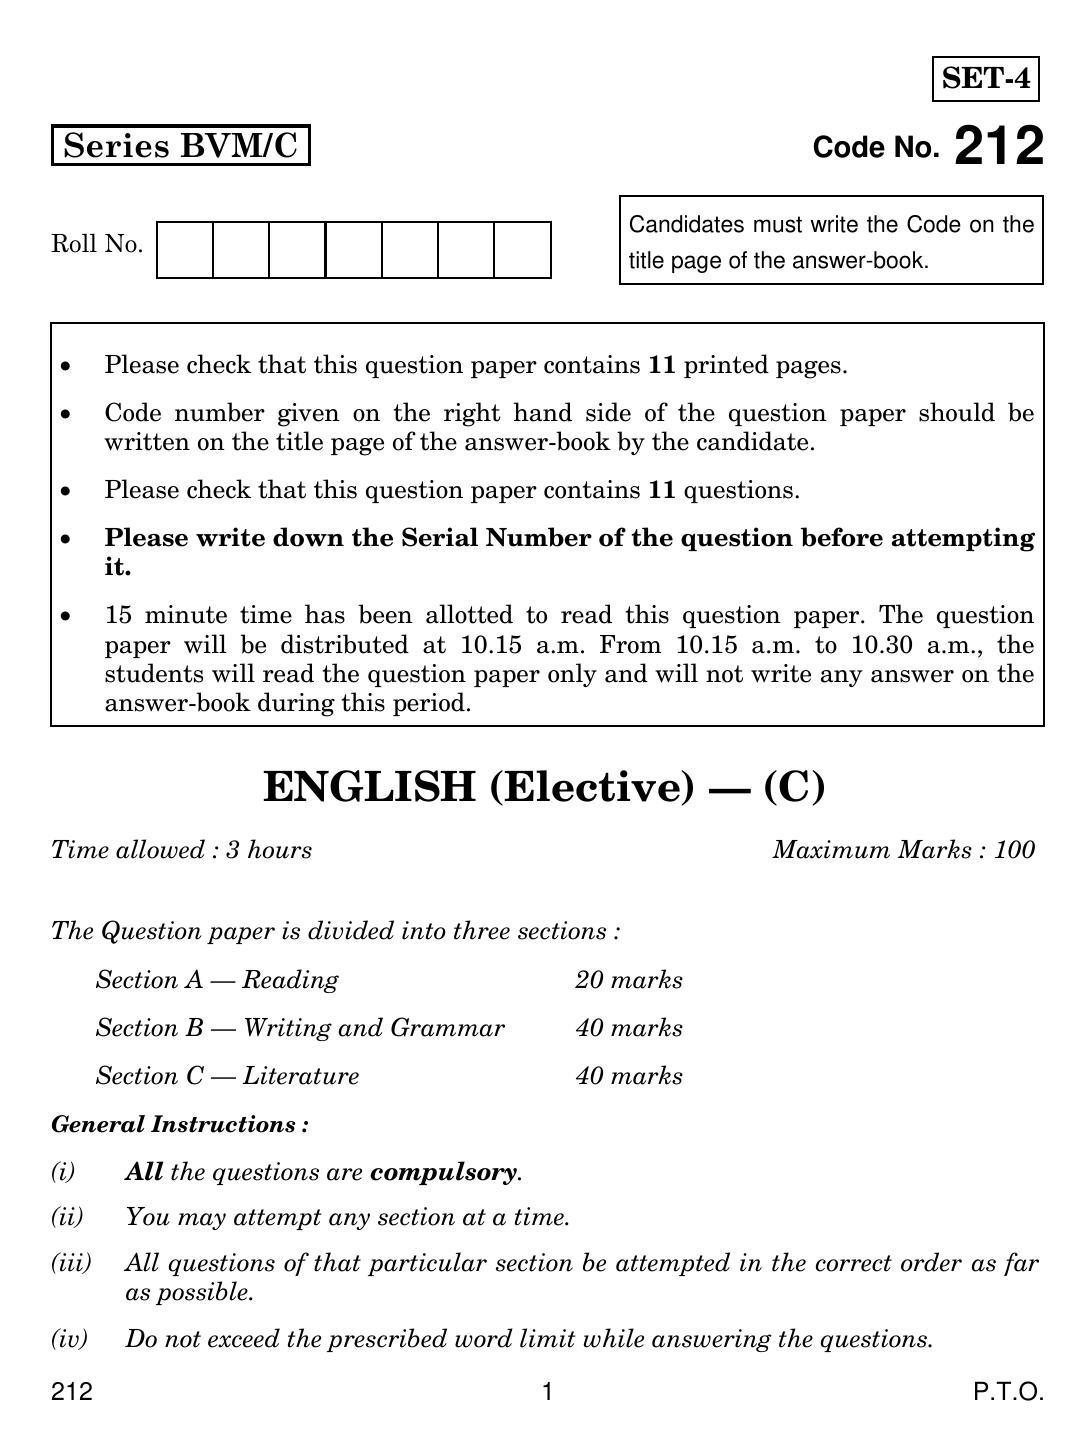 CBSE Class 12 212 ENGLISH ELECTIVE - C 2019 Compartment Question Paper - Page 1